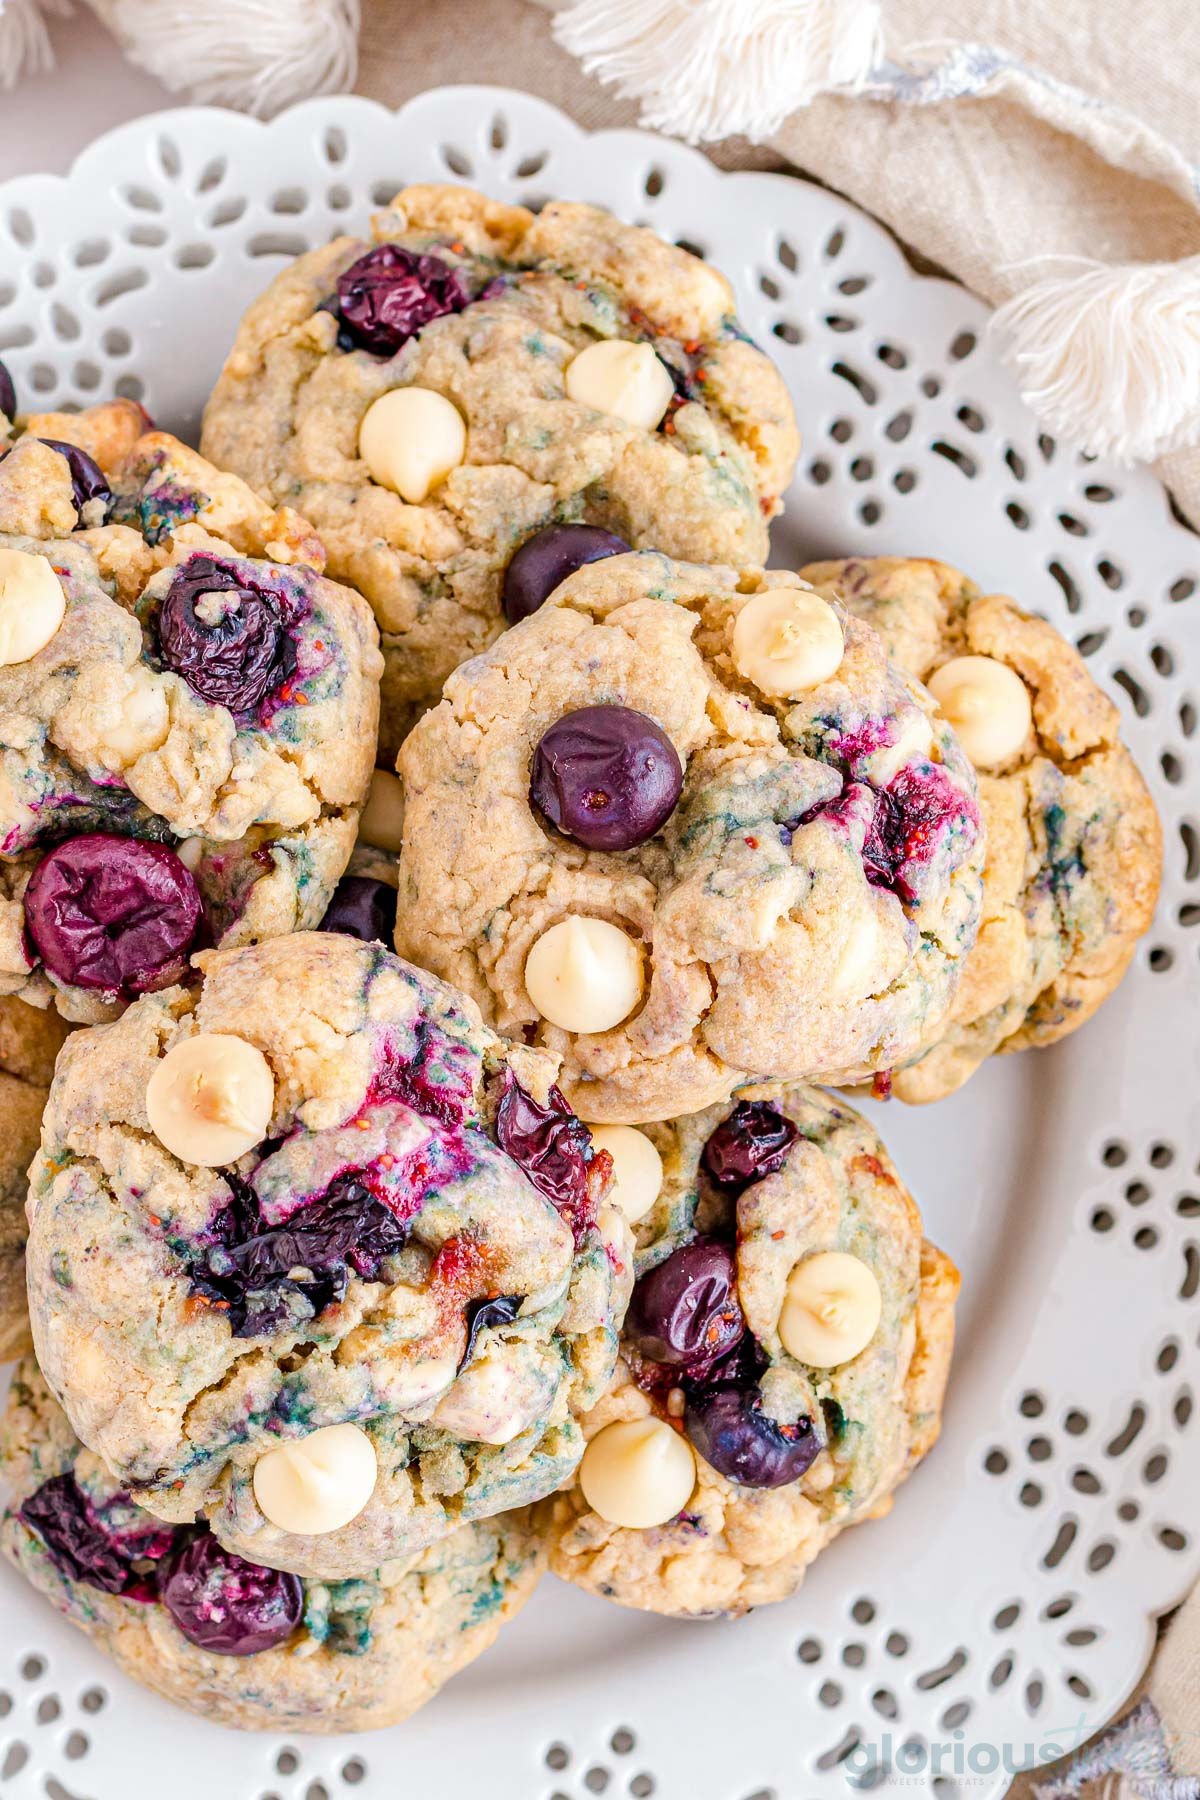 blueberry cookies are arranged on a white plate. cookies are close up to show the texture of the cookies and detail of blueberry and white chocolate chips.